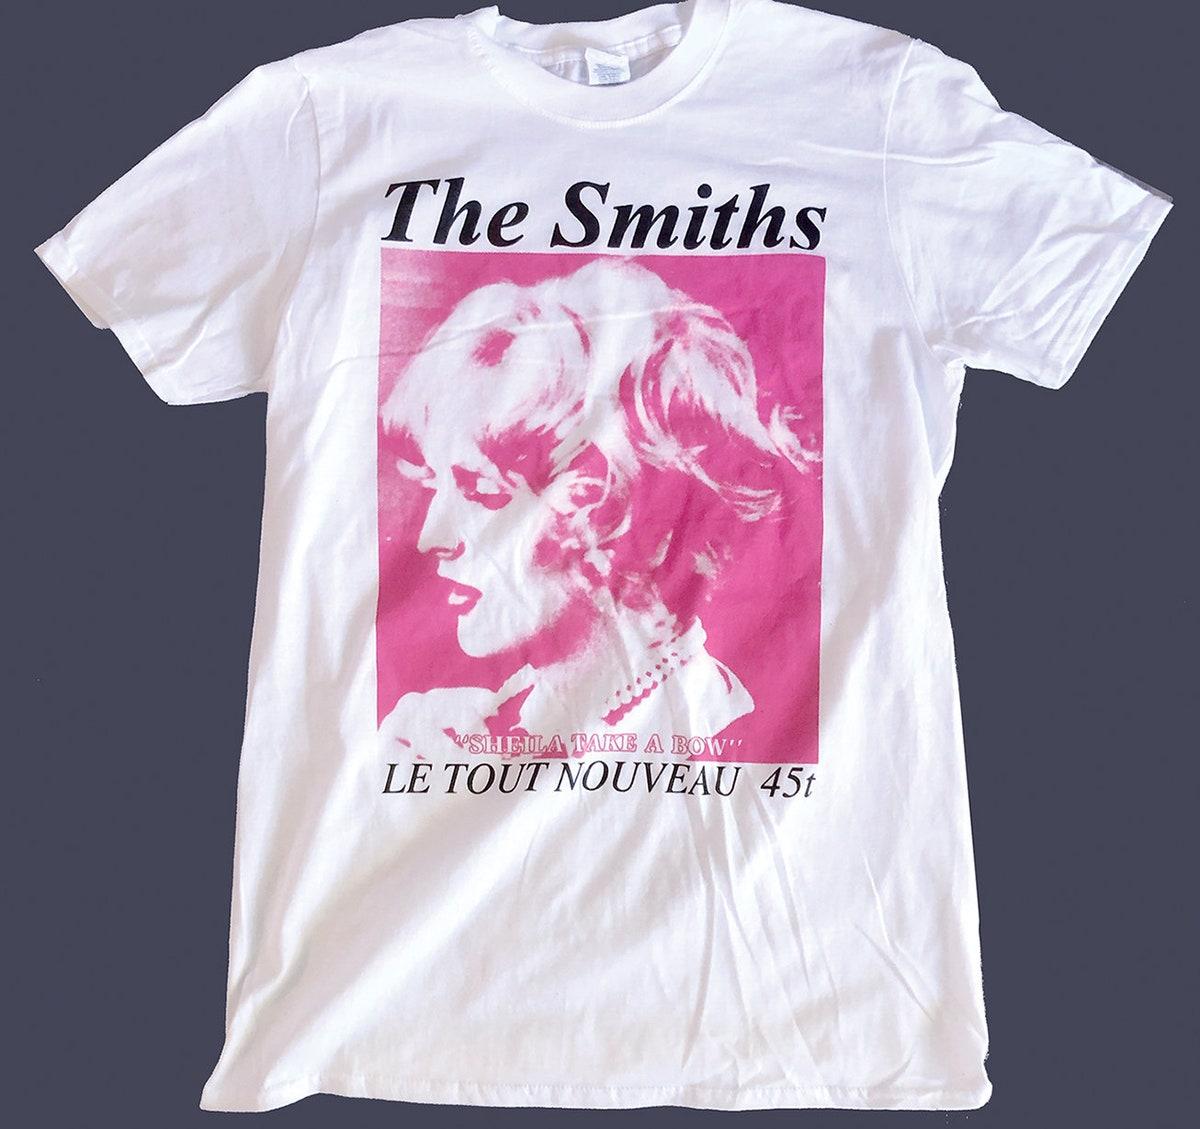 The Smiths The Queen Is Dead Album White T-shirt For Rock Music Fans